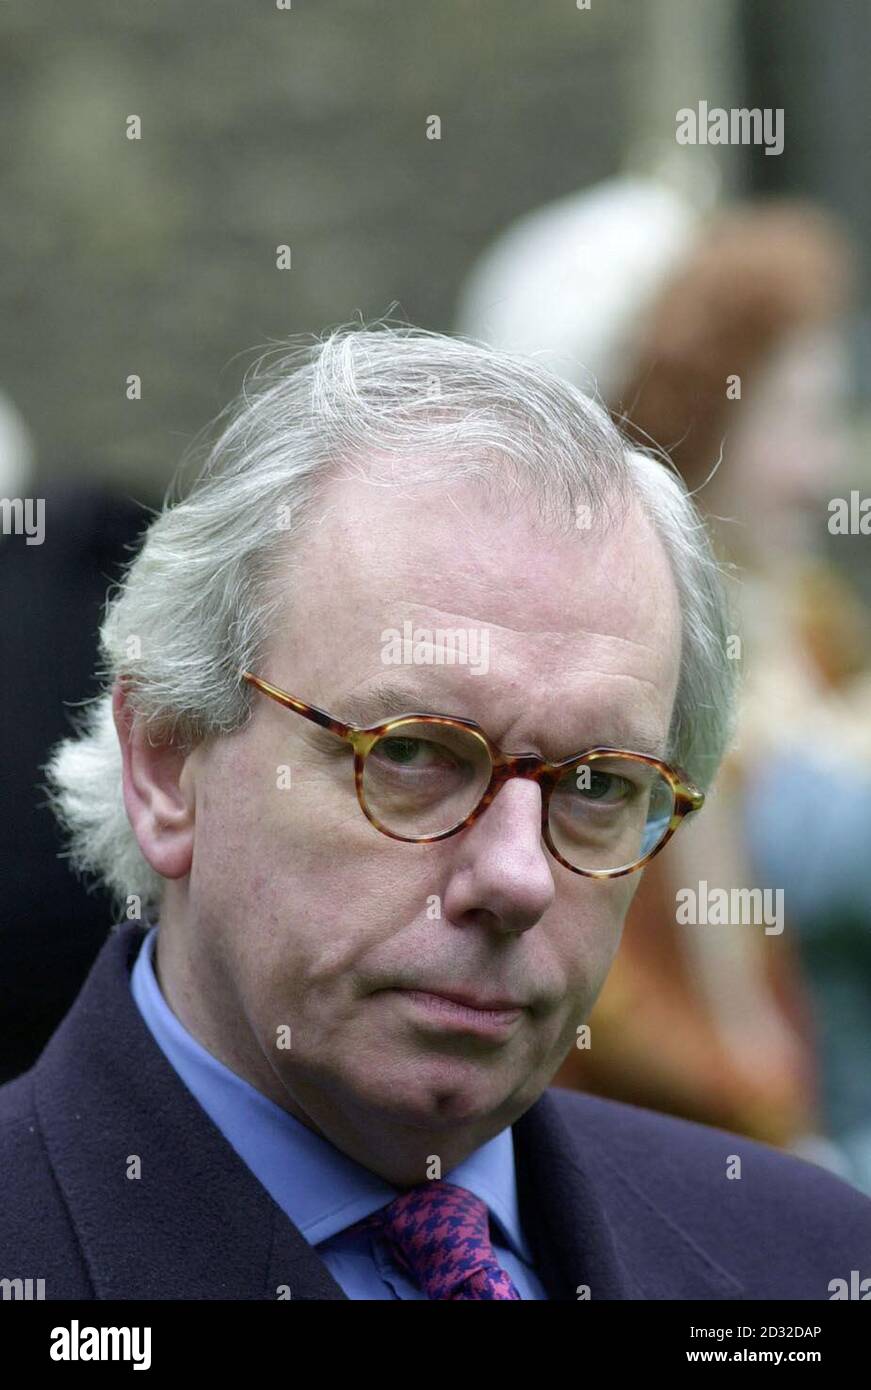 Historian Dr David Starkey has joined the ranks of Britain's top paid TV stars after signing a   4.5 million deal with Channel 4 and Granada, it was announced. The presenter is to make a 25-hour series on the history of the British monarchy in the four year deal.   * The contract, which will see Starkey earn around   75,000 per hour on screen, puts him in the same earning bracket as TV big hitters such as Desmond Lynam and Cilla Black. Stock Photo